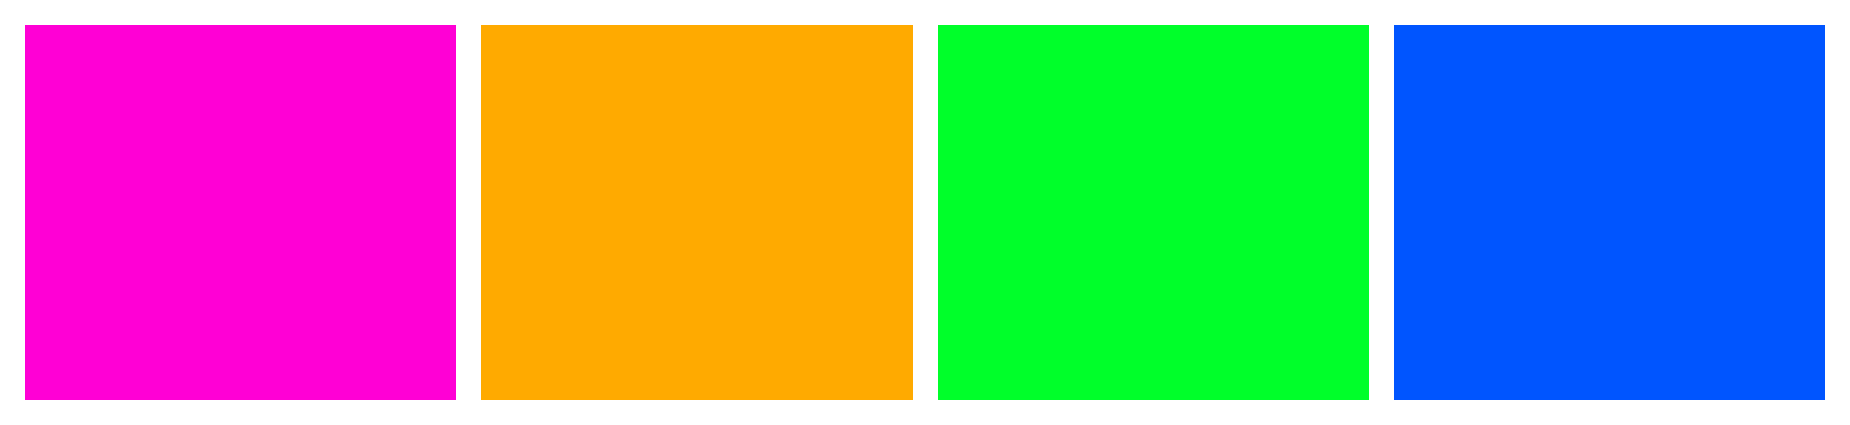 Generating a square color scheme from a base hue using an HSL function to generate a color palette